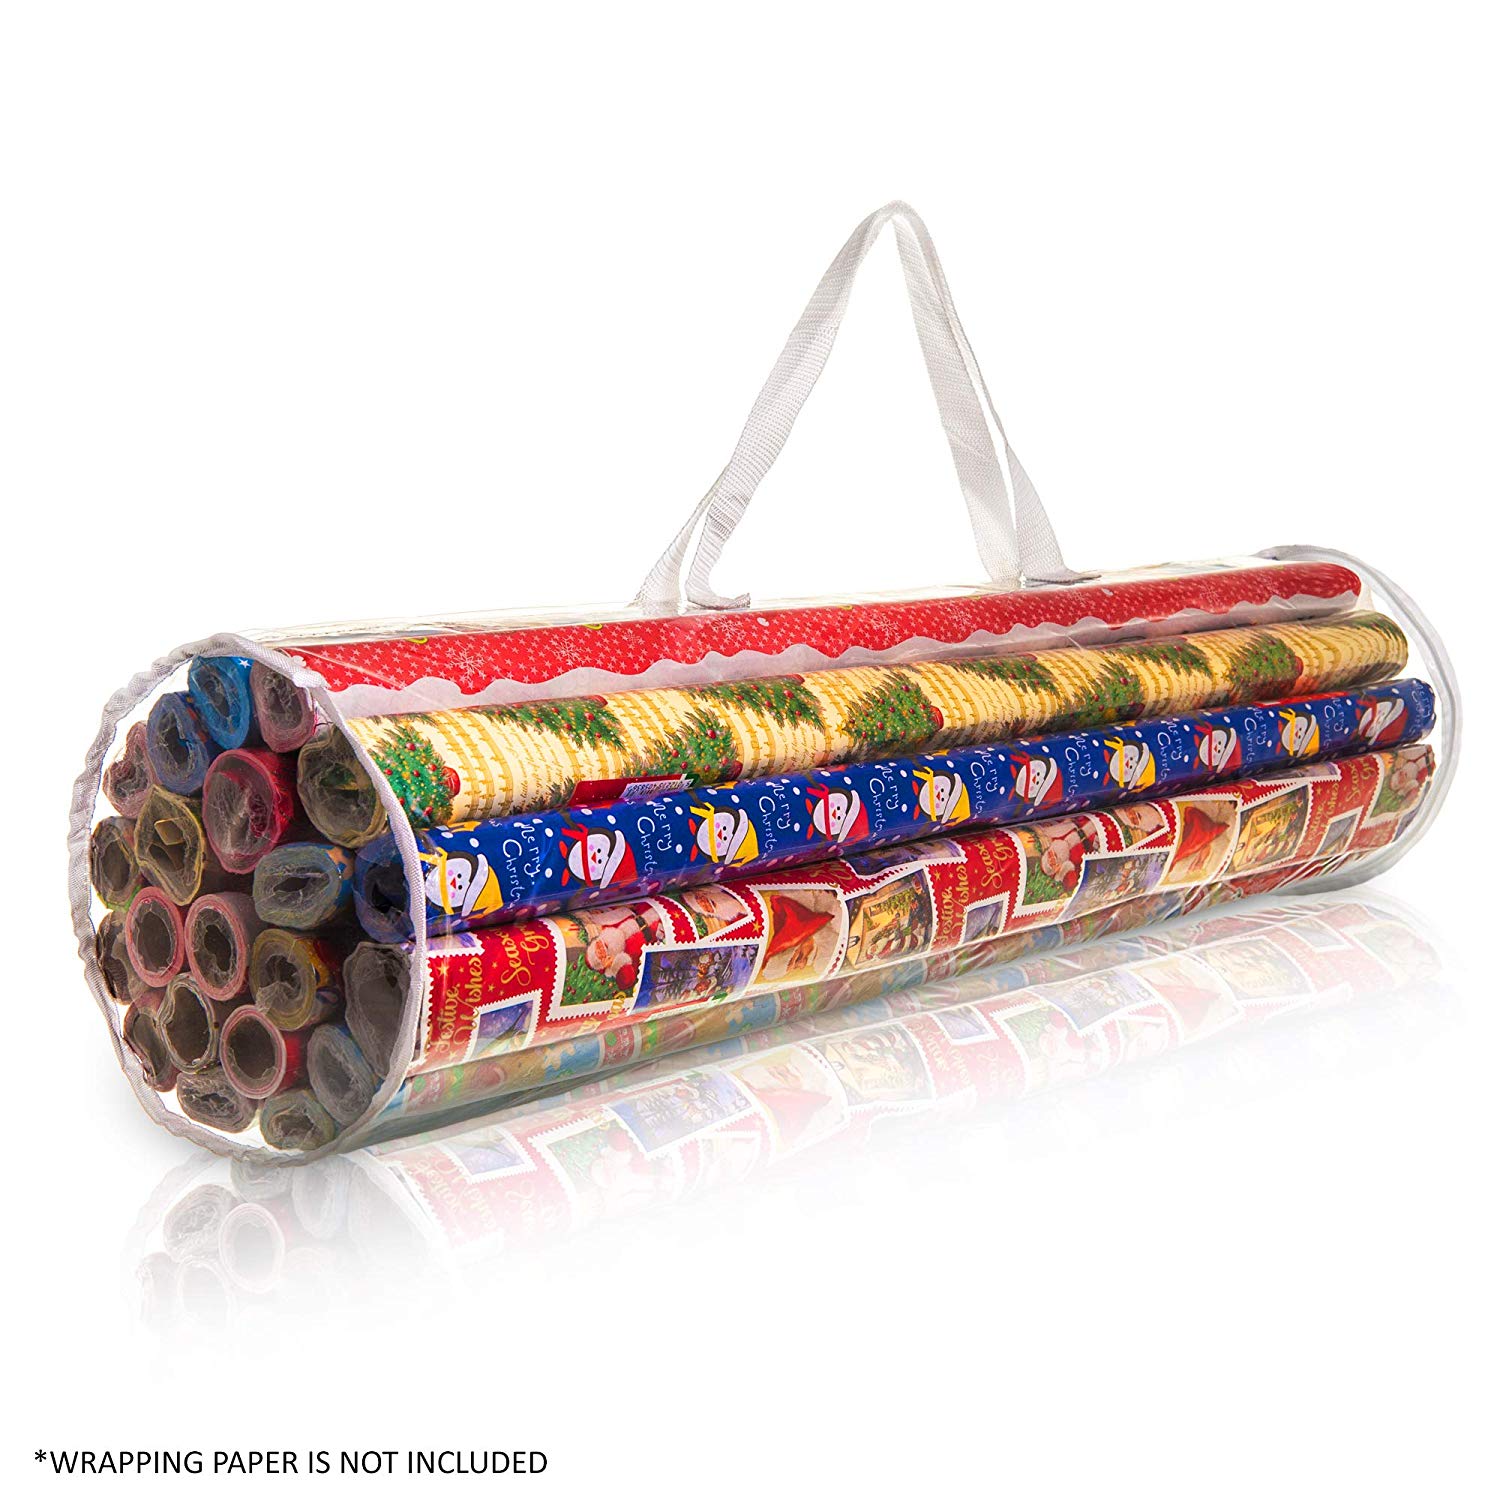 Wrapping holder 1.jpg